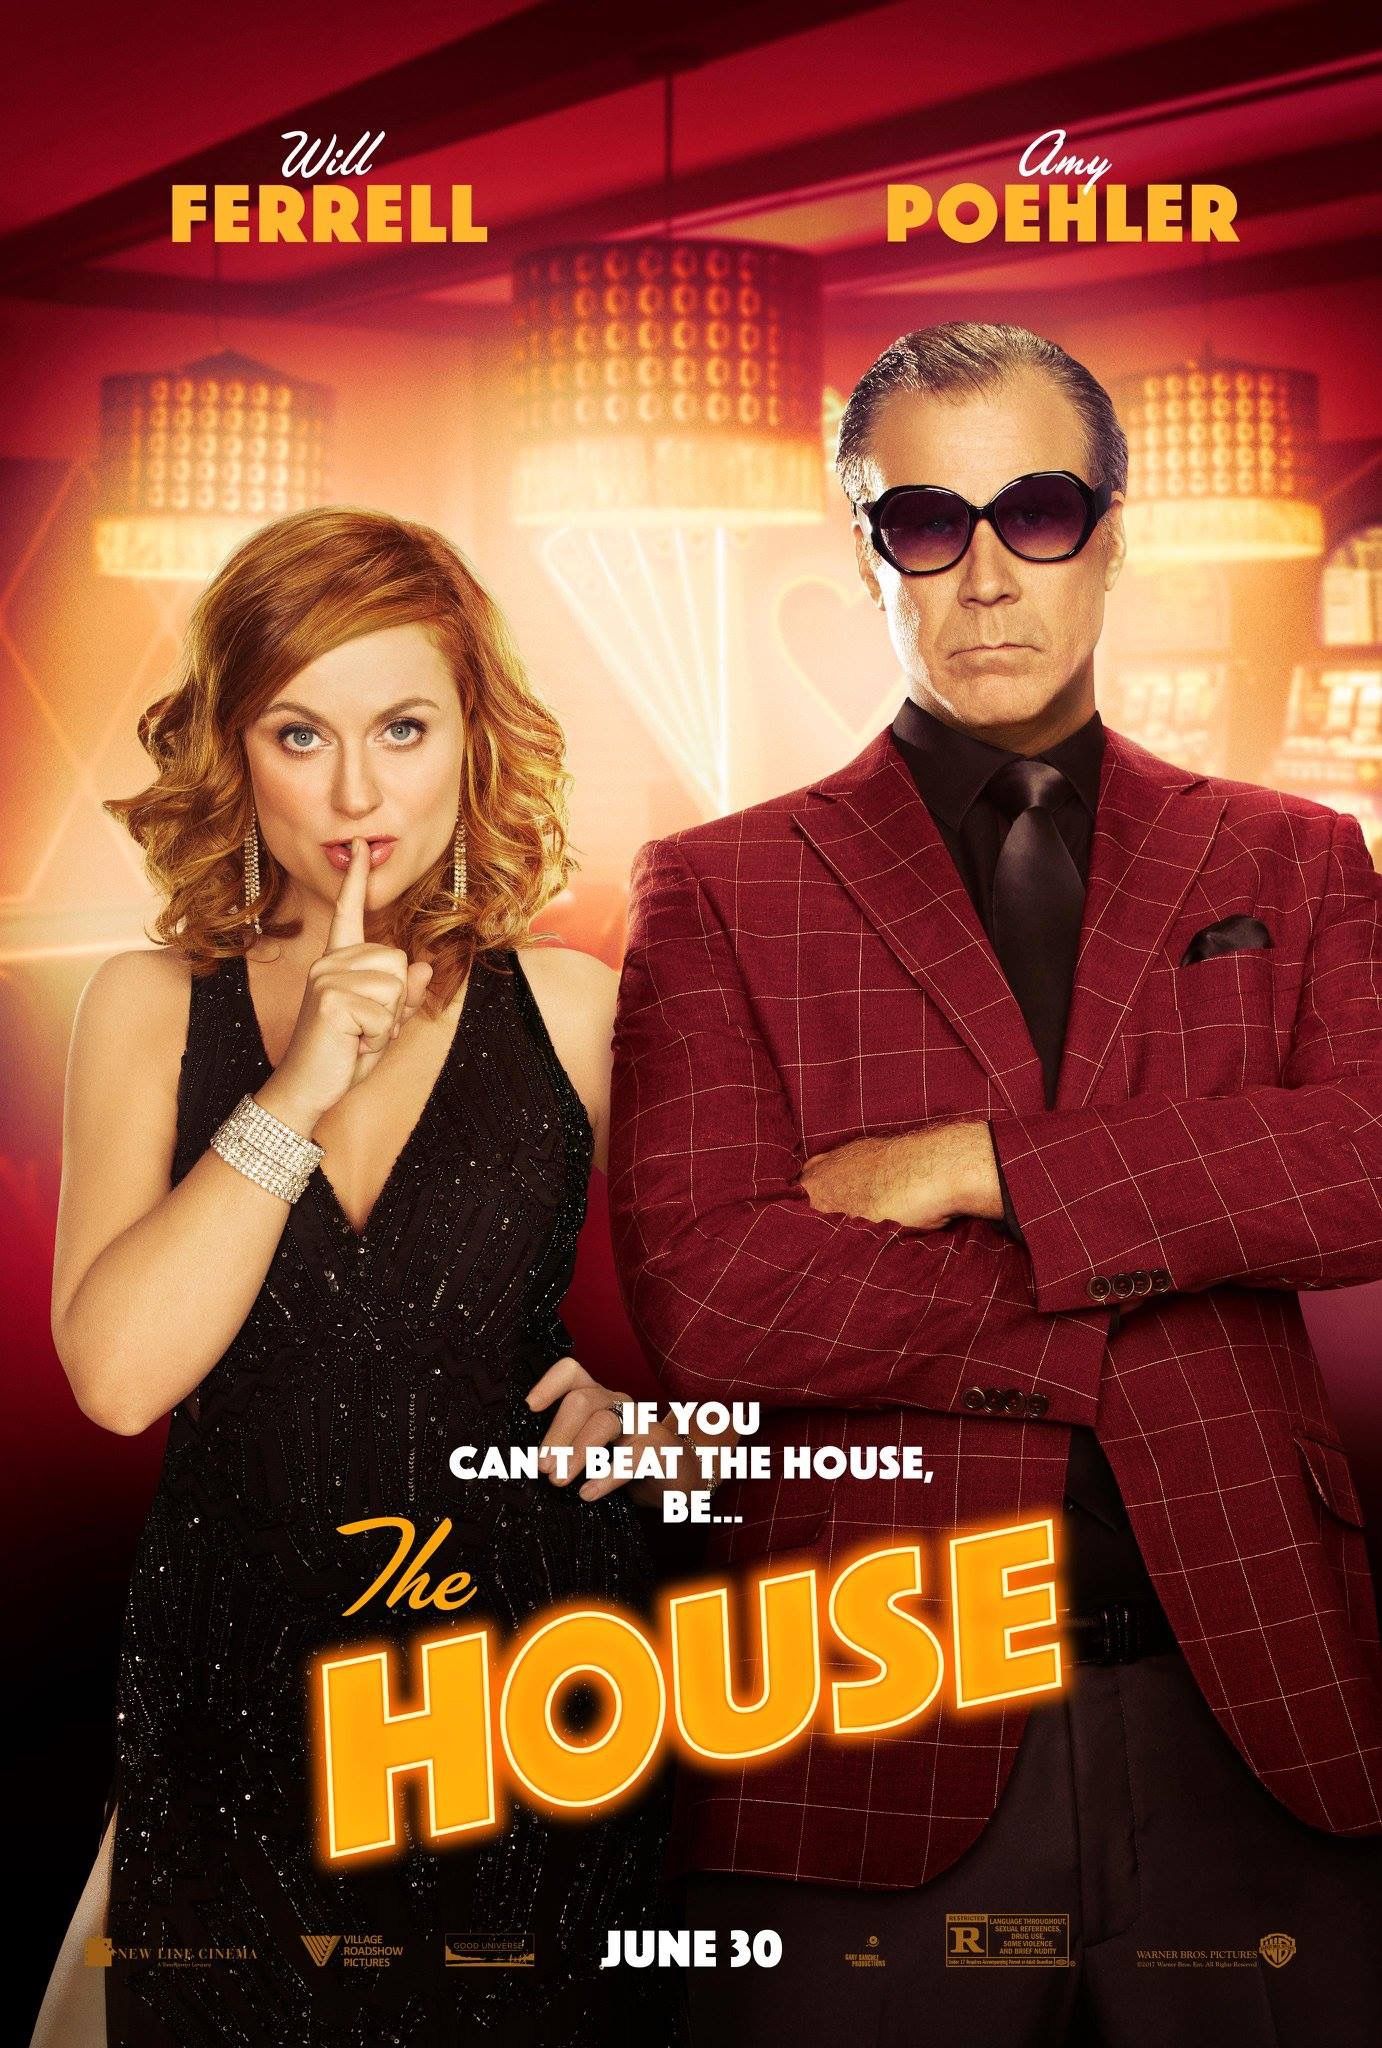 &quot;The House&quot; movie poster. Stars Will Ferrell and Amy Poehler